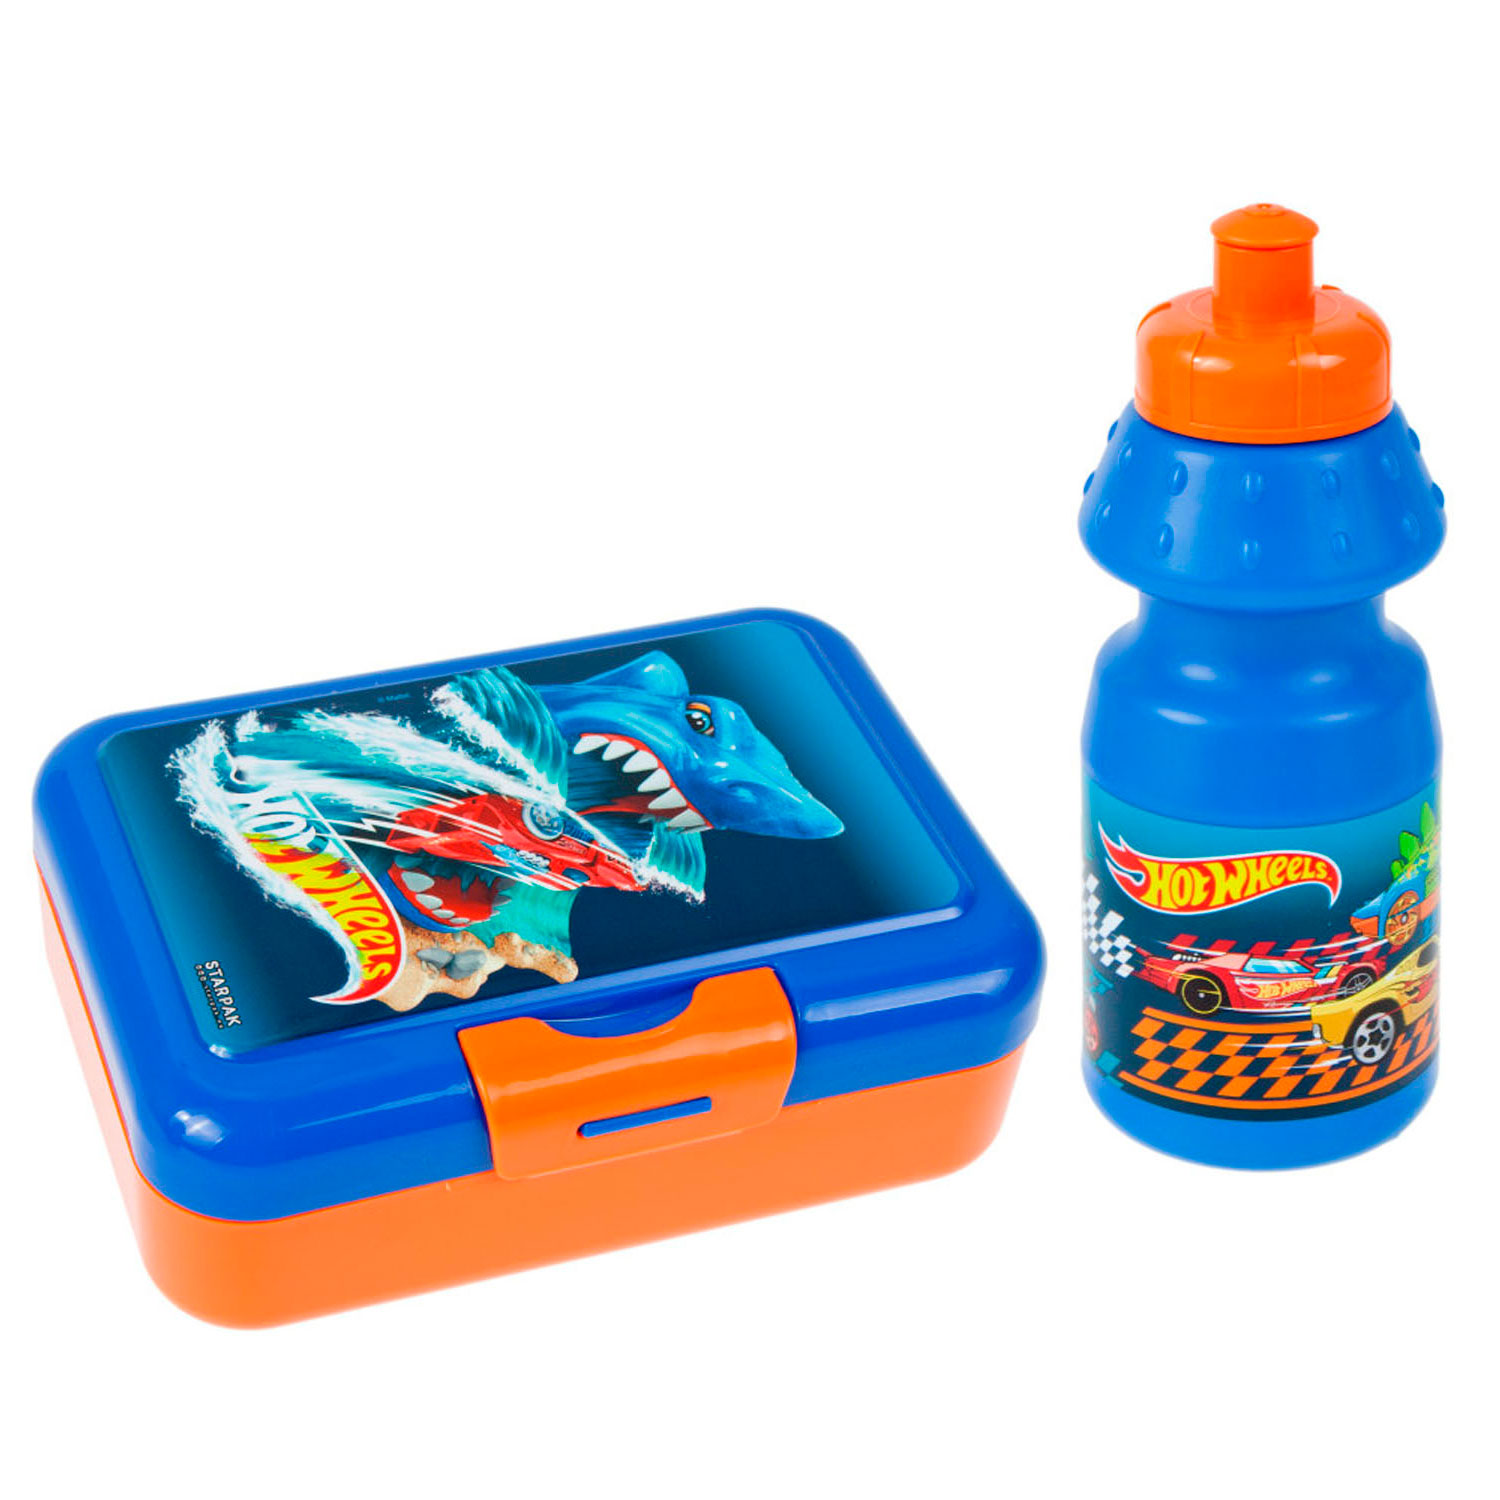 Lunch box with Hot Wheels drinking bottle